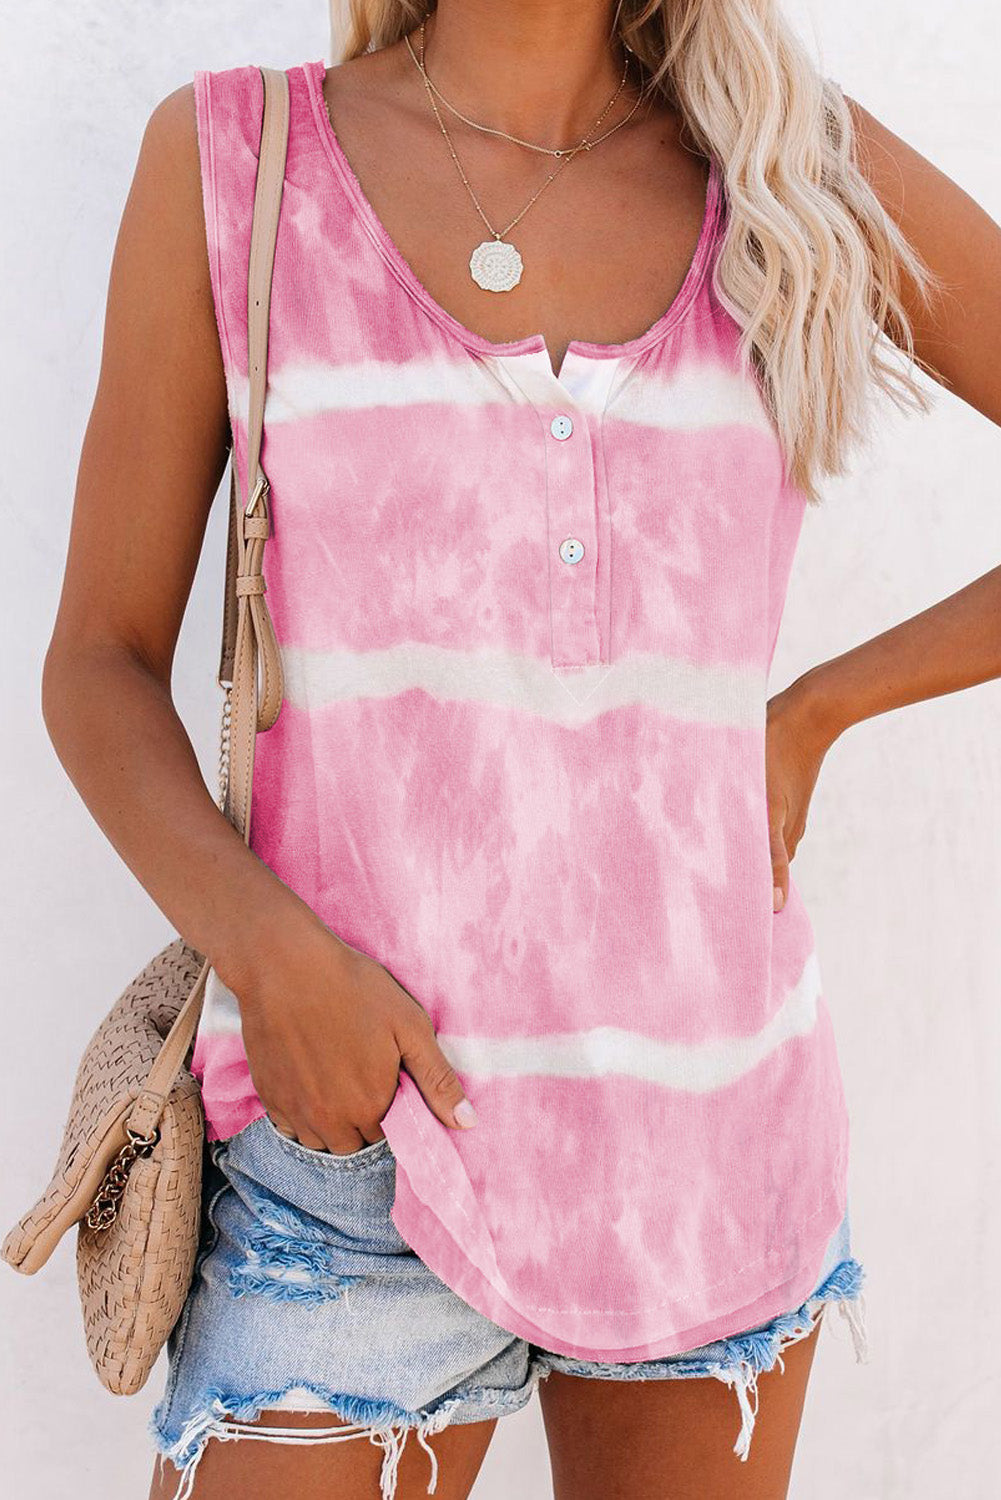 Scoop Neck Button Front Blue And White Tie Dye Tank Top